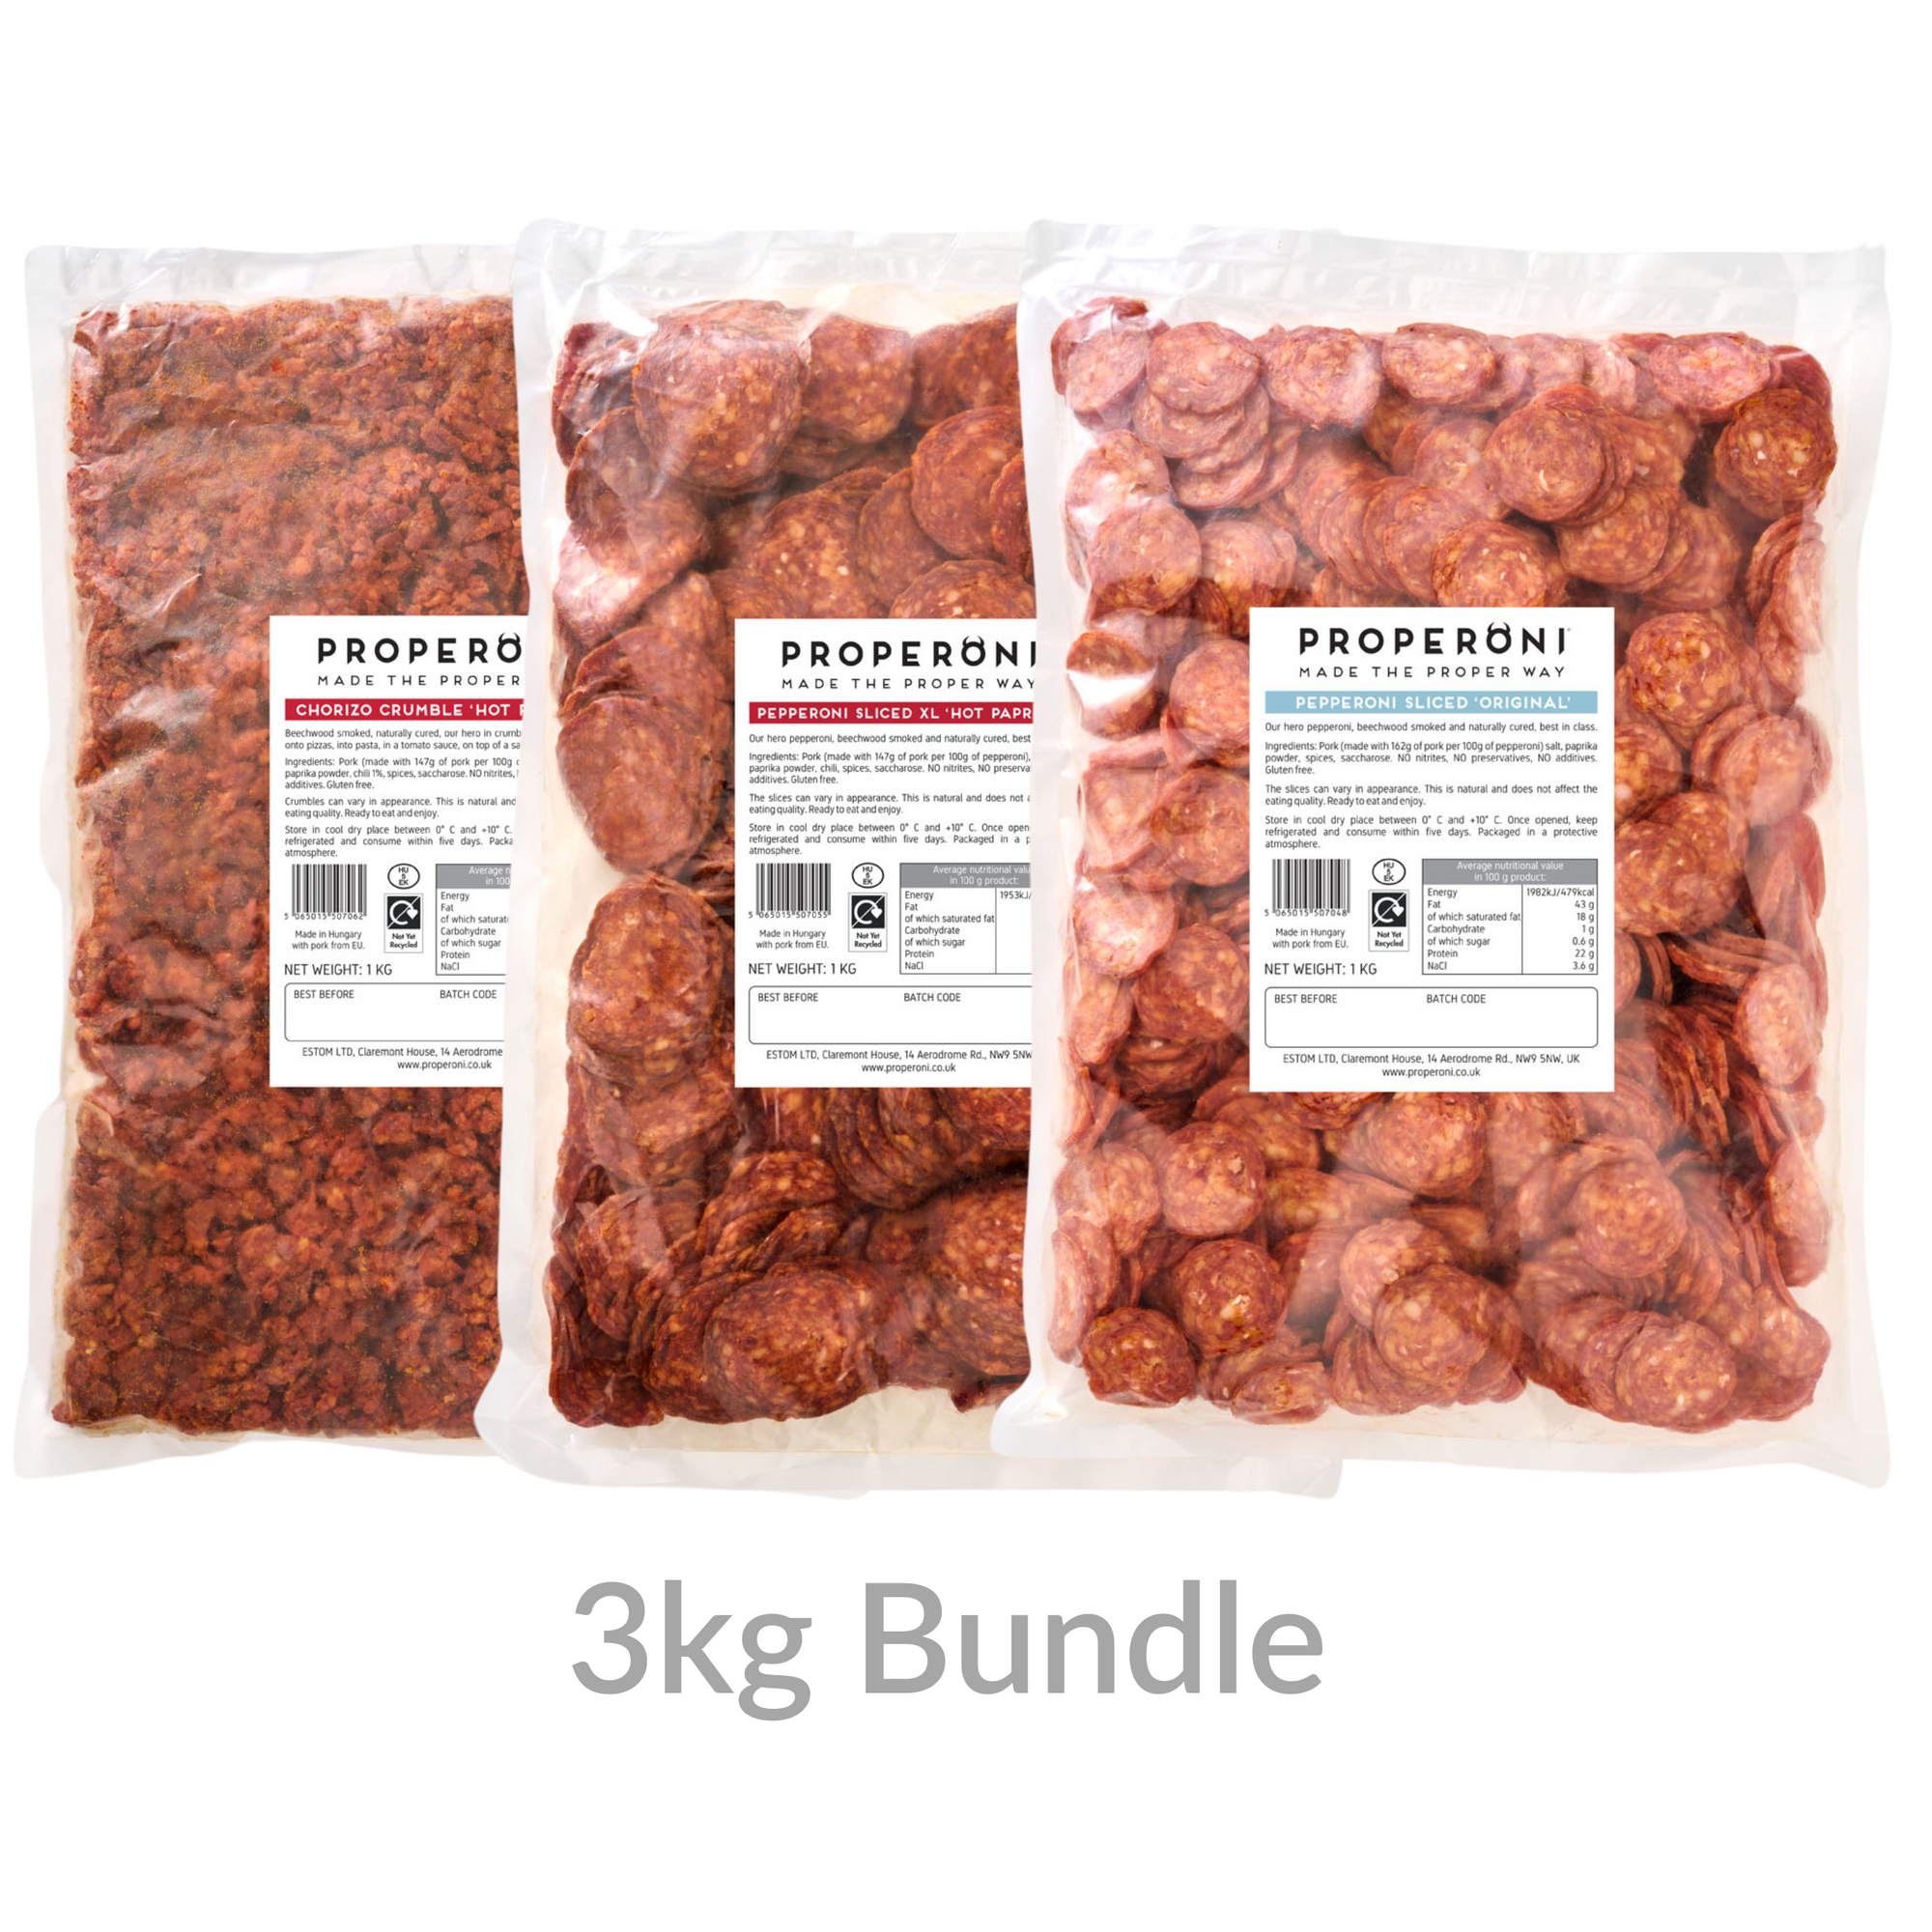 PROPERONI Sliced Pepperoni Trade Bundle 3 x 1kg - Shipping Incl. (excl. Northern Ireland)